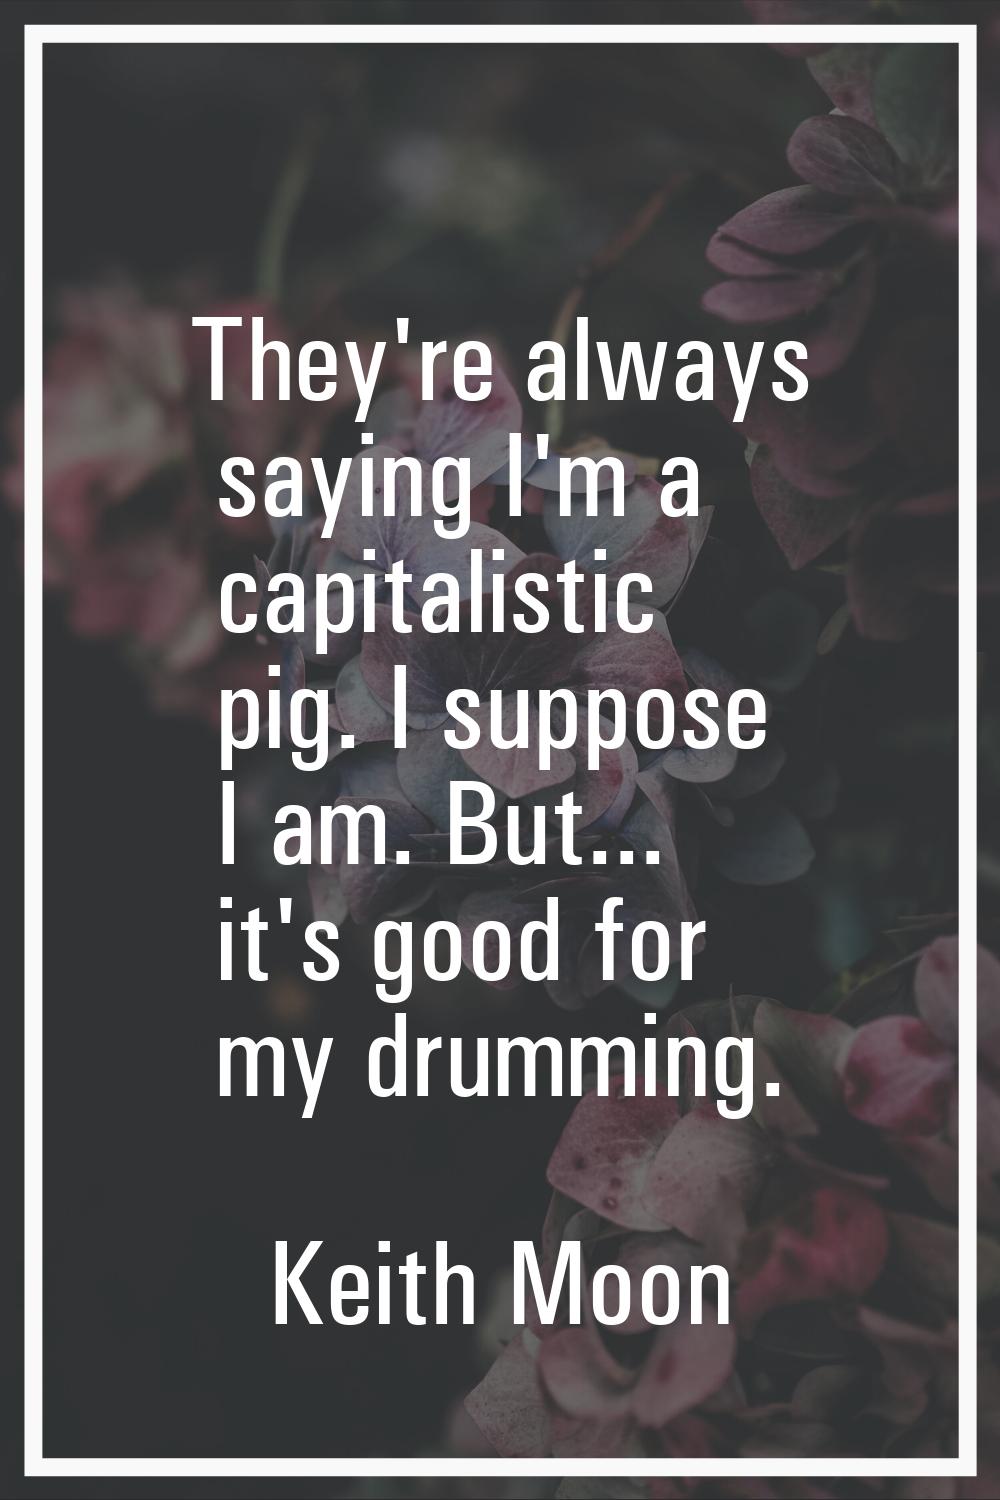 They're always saying I'm a capitalistic pig. I suppose I am. But... it's good for my drumming.